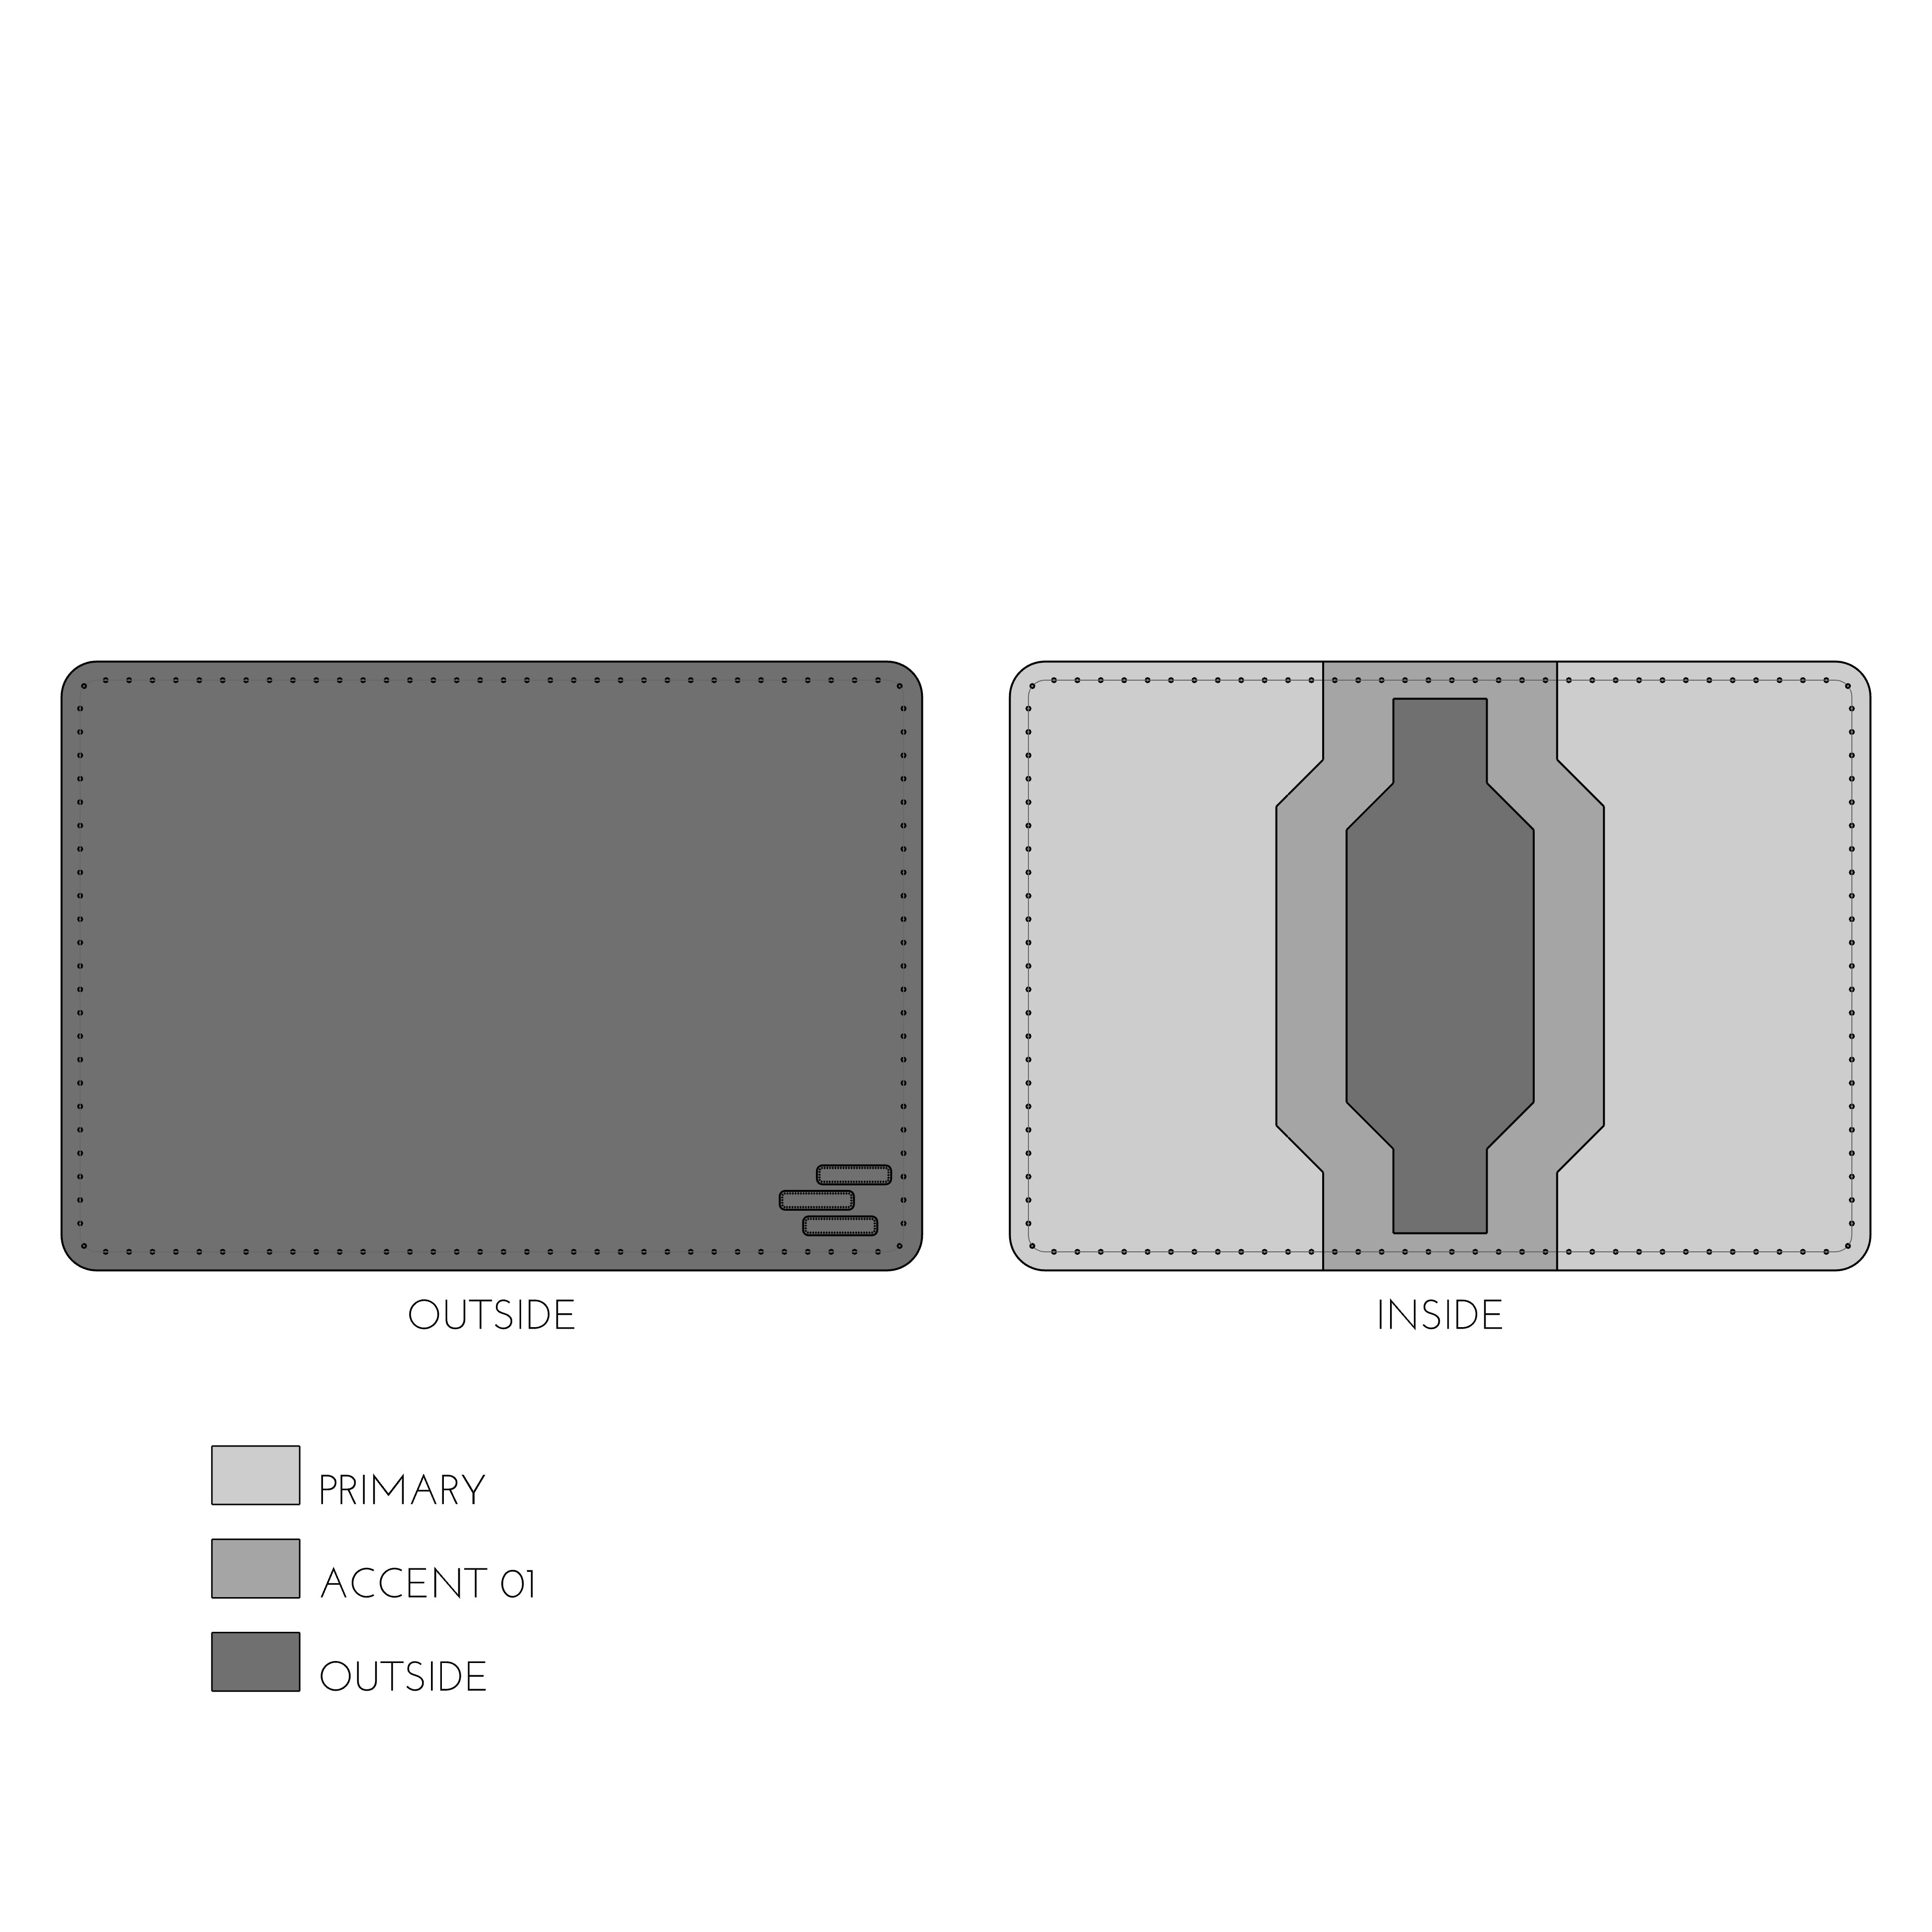 Passport Cover drawing free image download